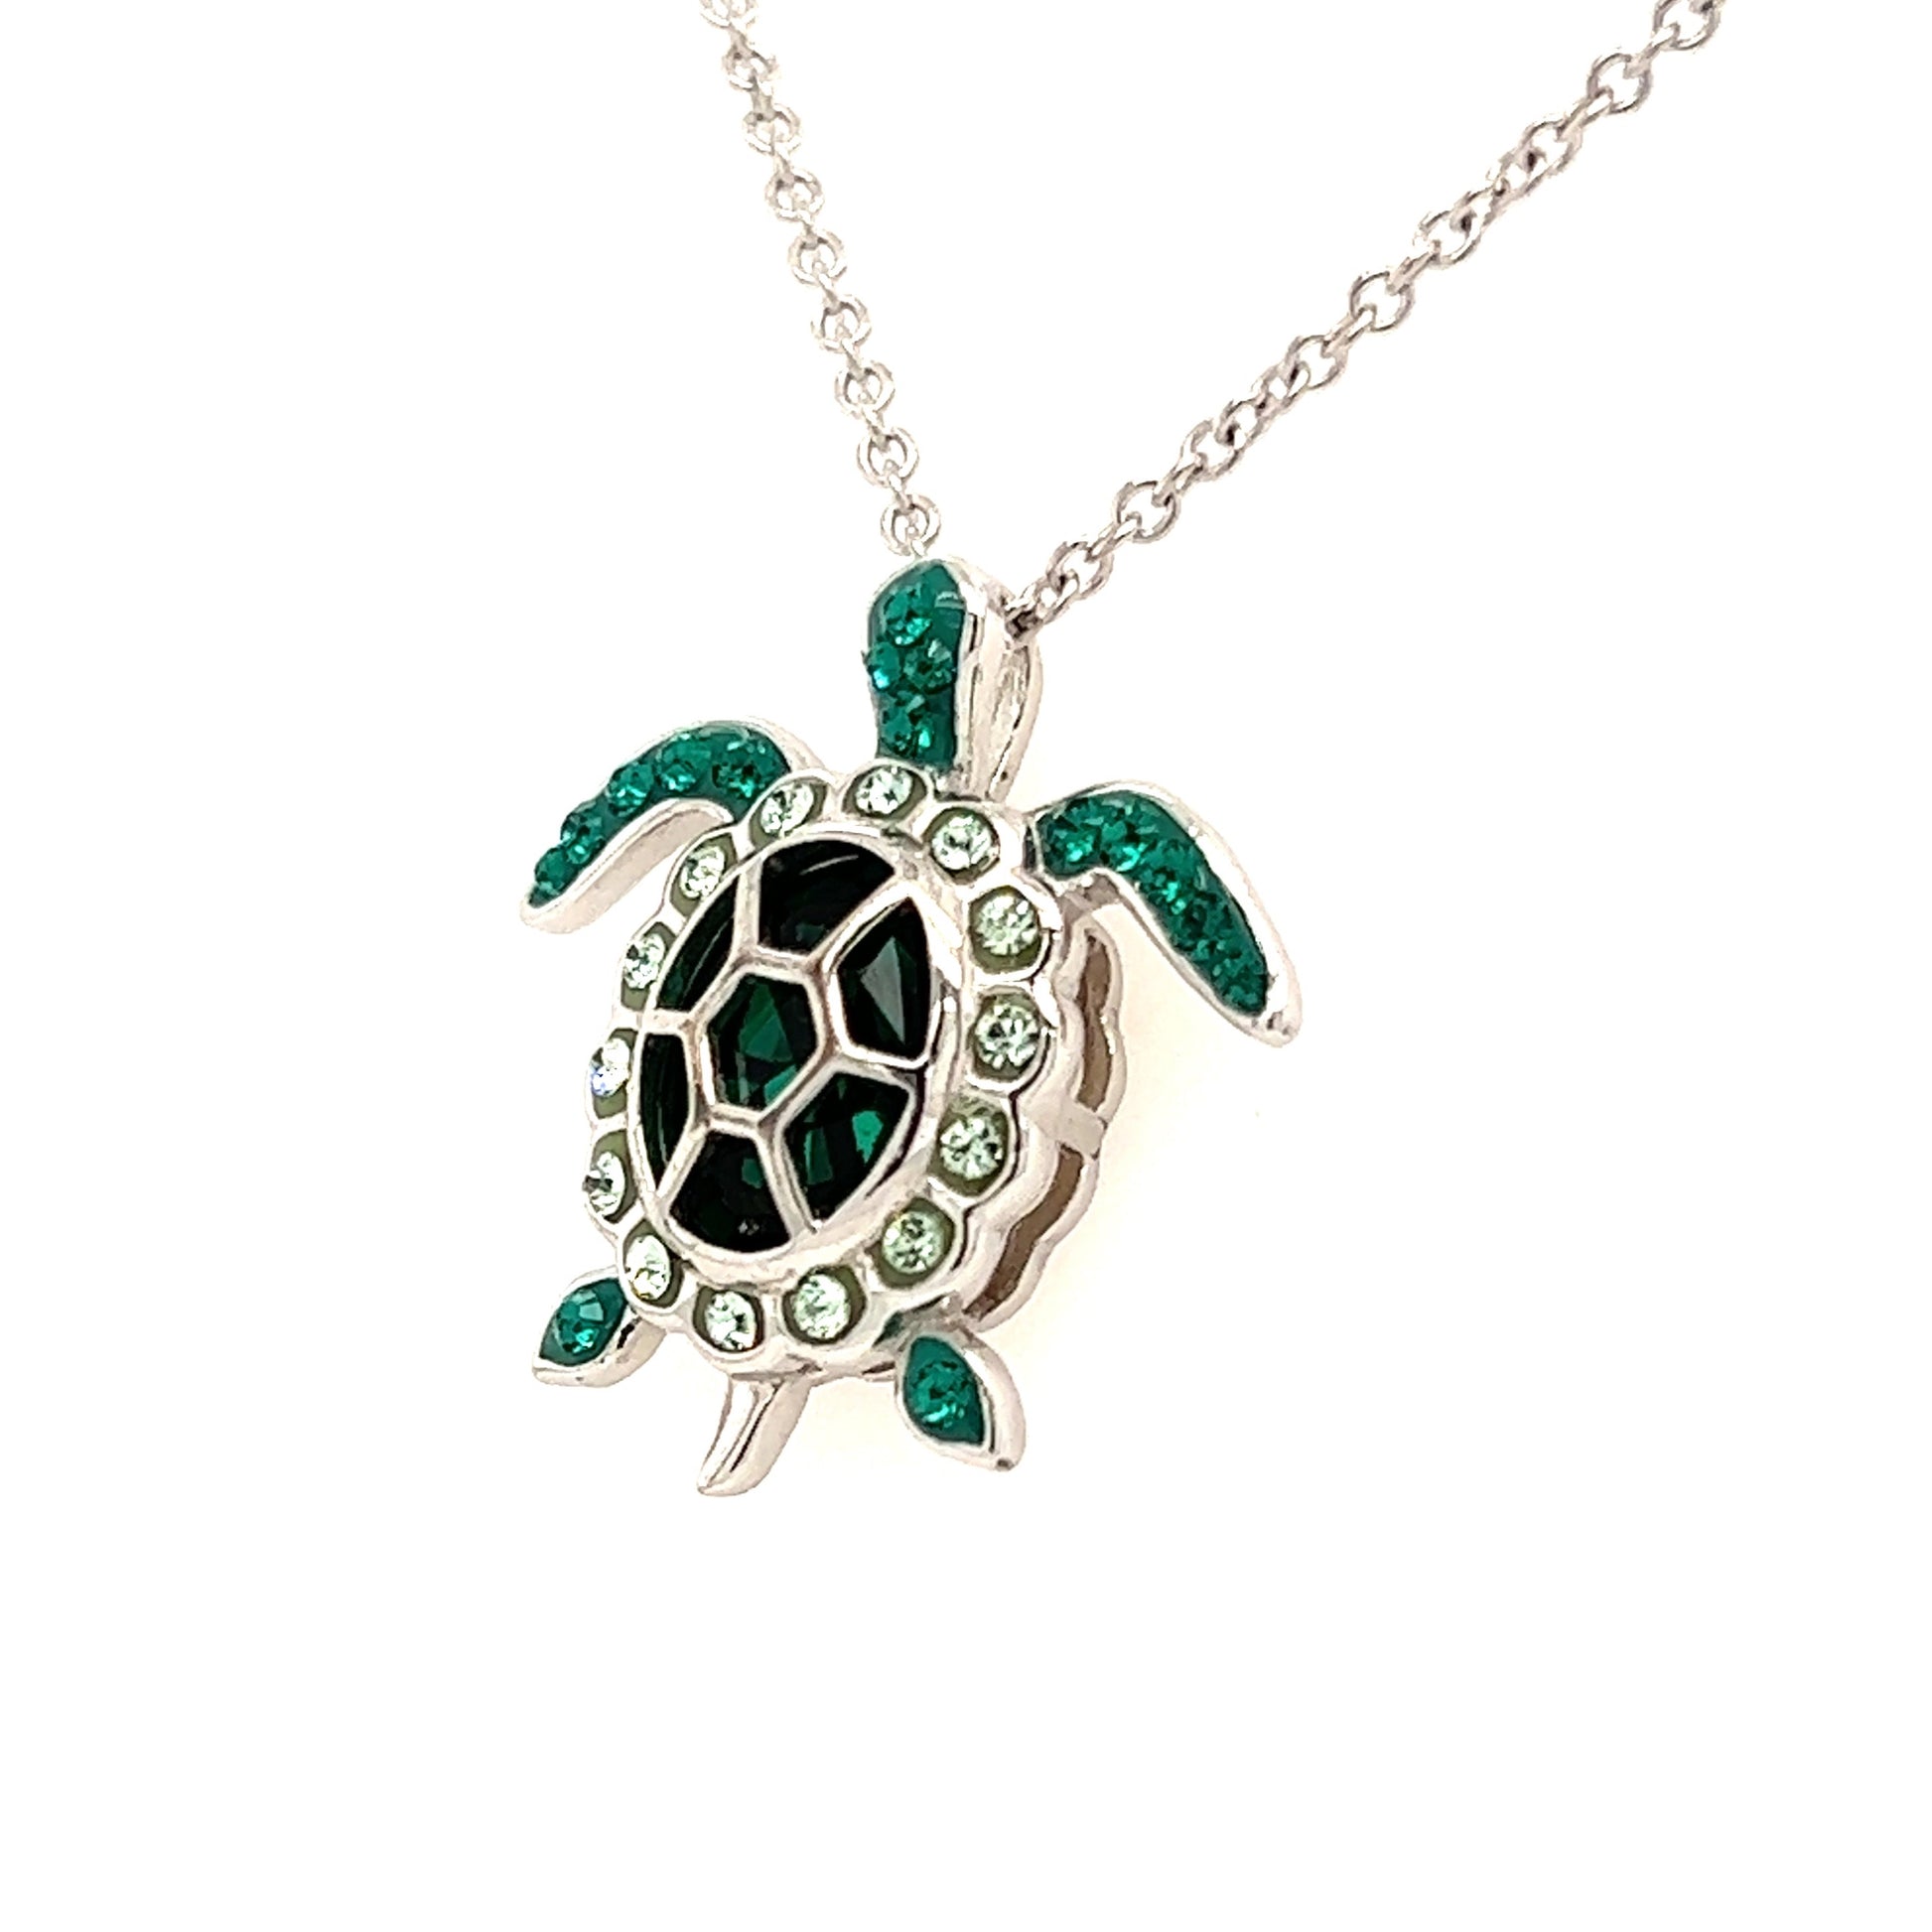 Sea Turtle Necklace with Deep Green Crystals in Sterling Silver. Right Side View